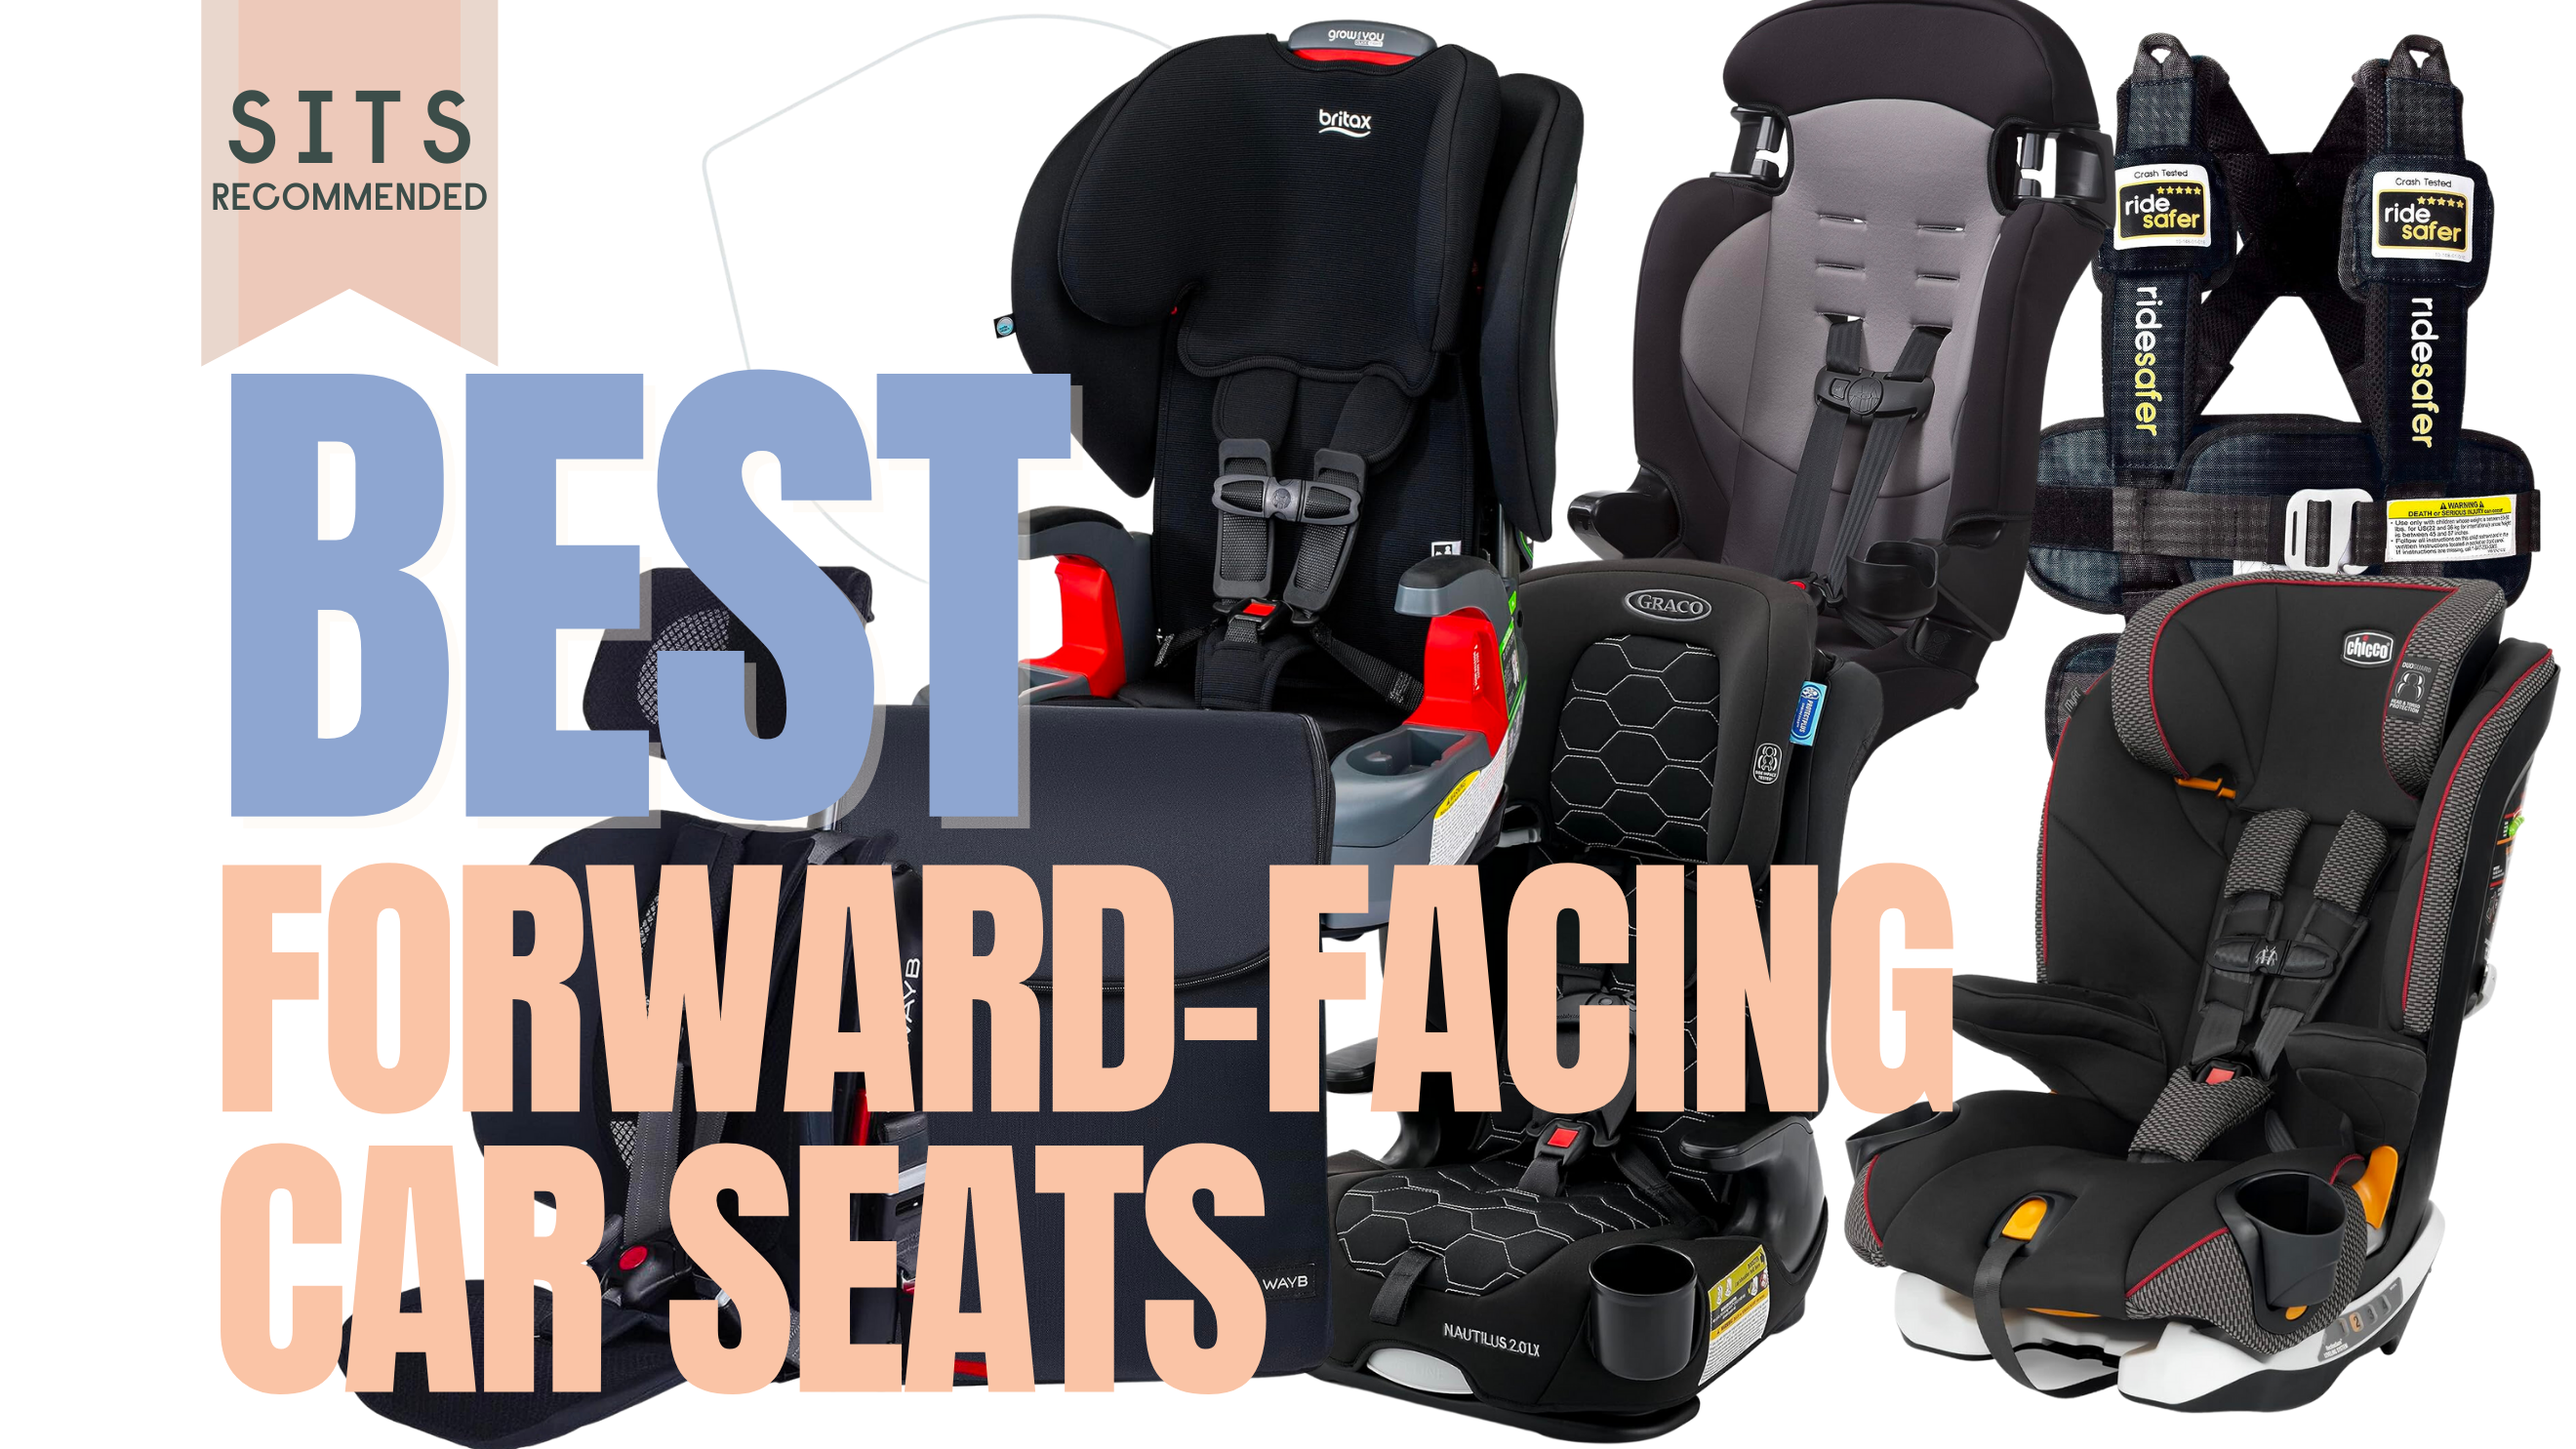 Headrests and child car seats - Fundación MAPFRE